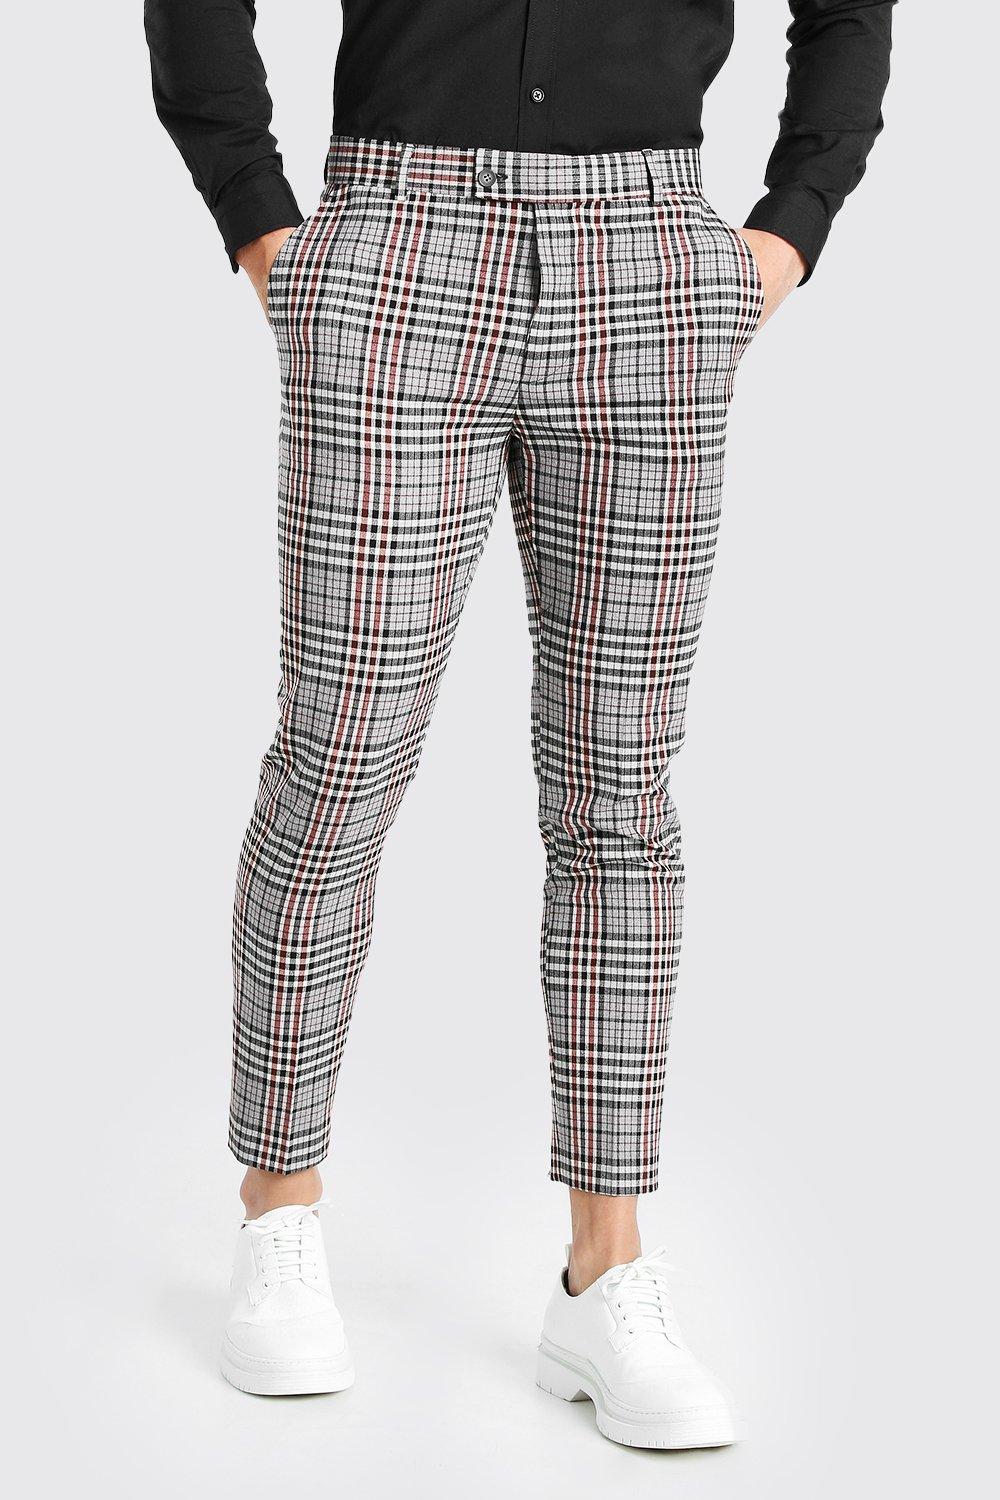 Mens Skinny Fit Grey Check Cropped Suit Trousers, Grey